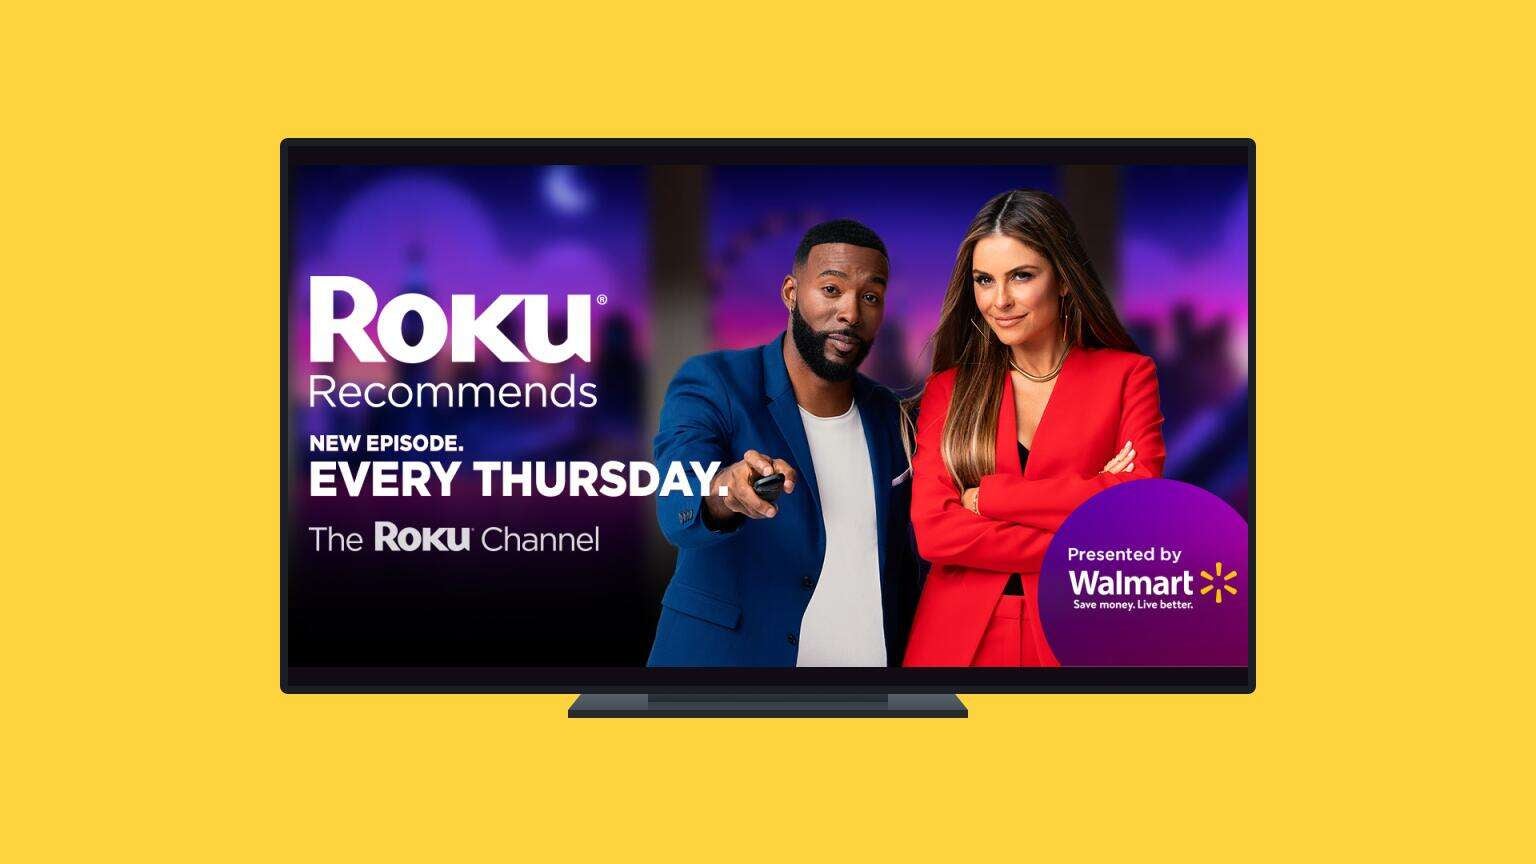 Roku Launches Their First Weekly Entertainment Show on The Roku Channel